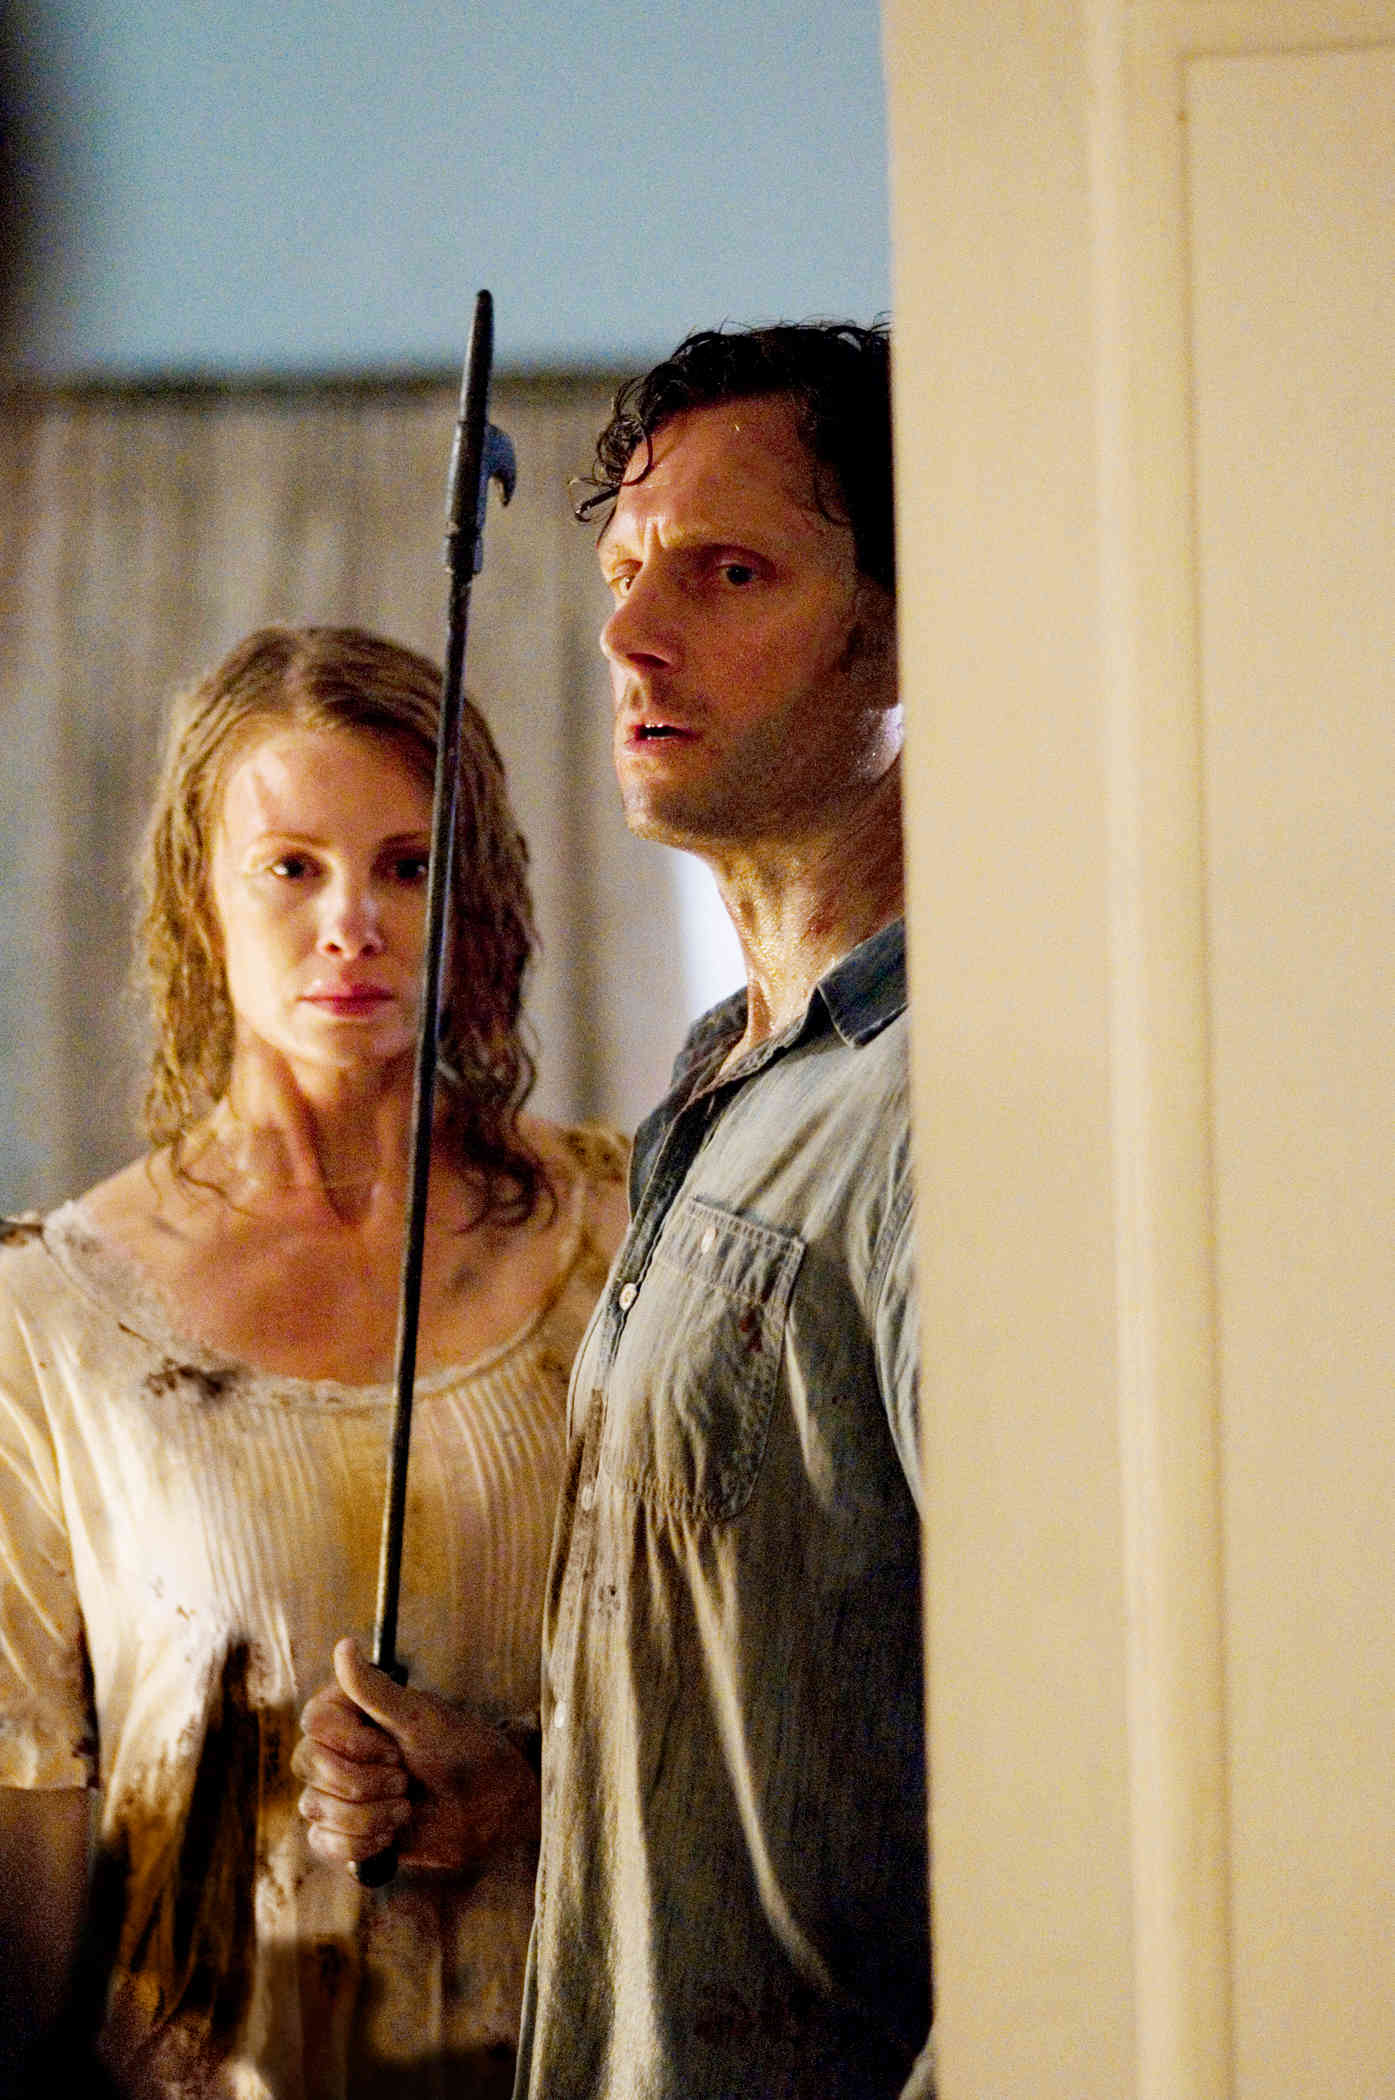 Monica Potter stars as Emma Collingwood and Tony Goldwyn stars as John Collingwood in Rogue Pictures' The Last House on the Left (2009). Photo credit by Lacey Terrell.